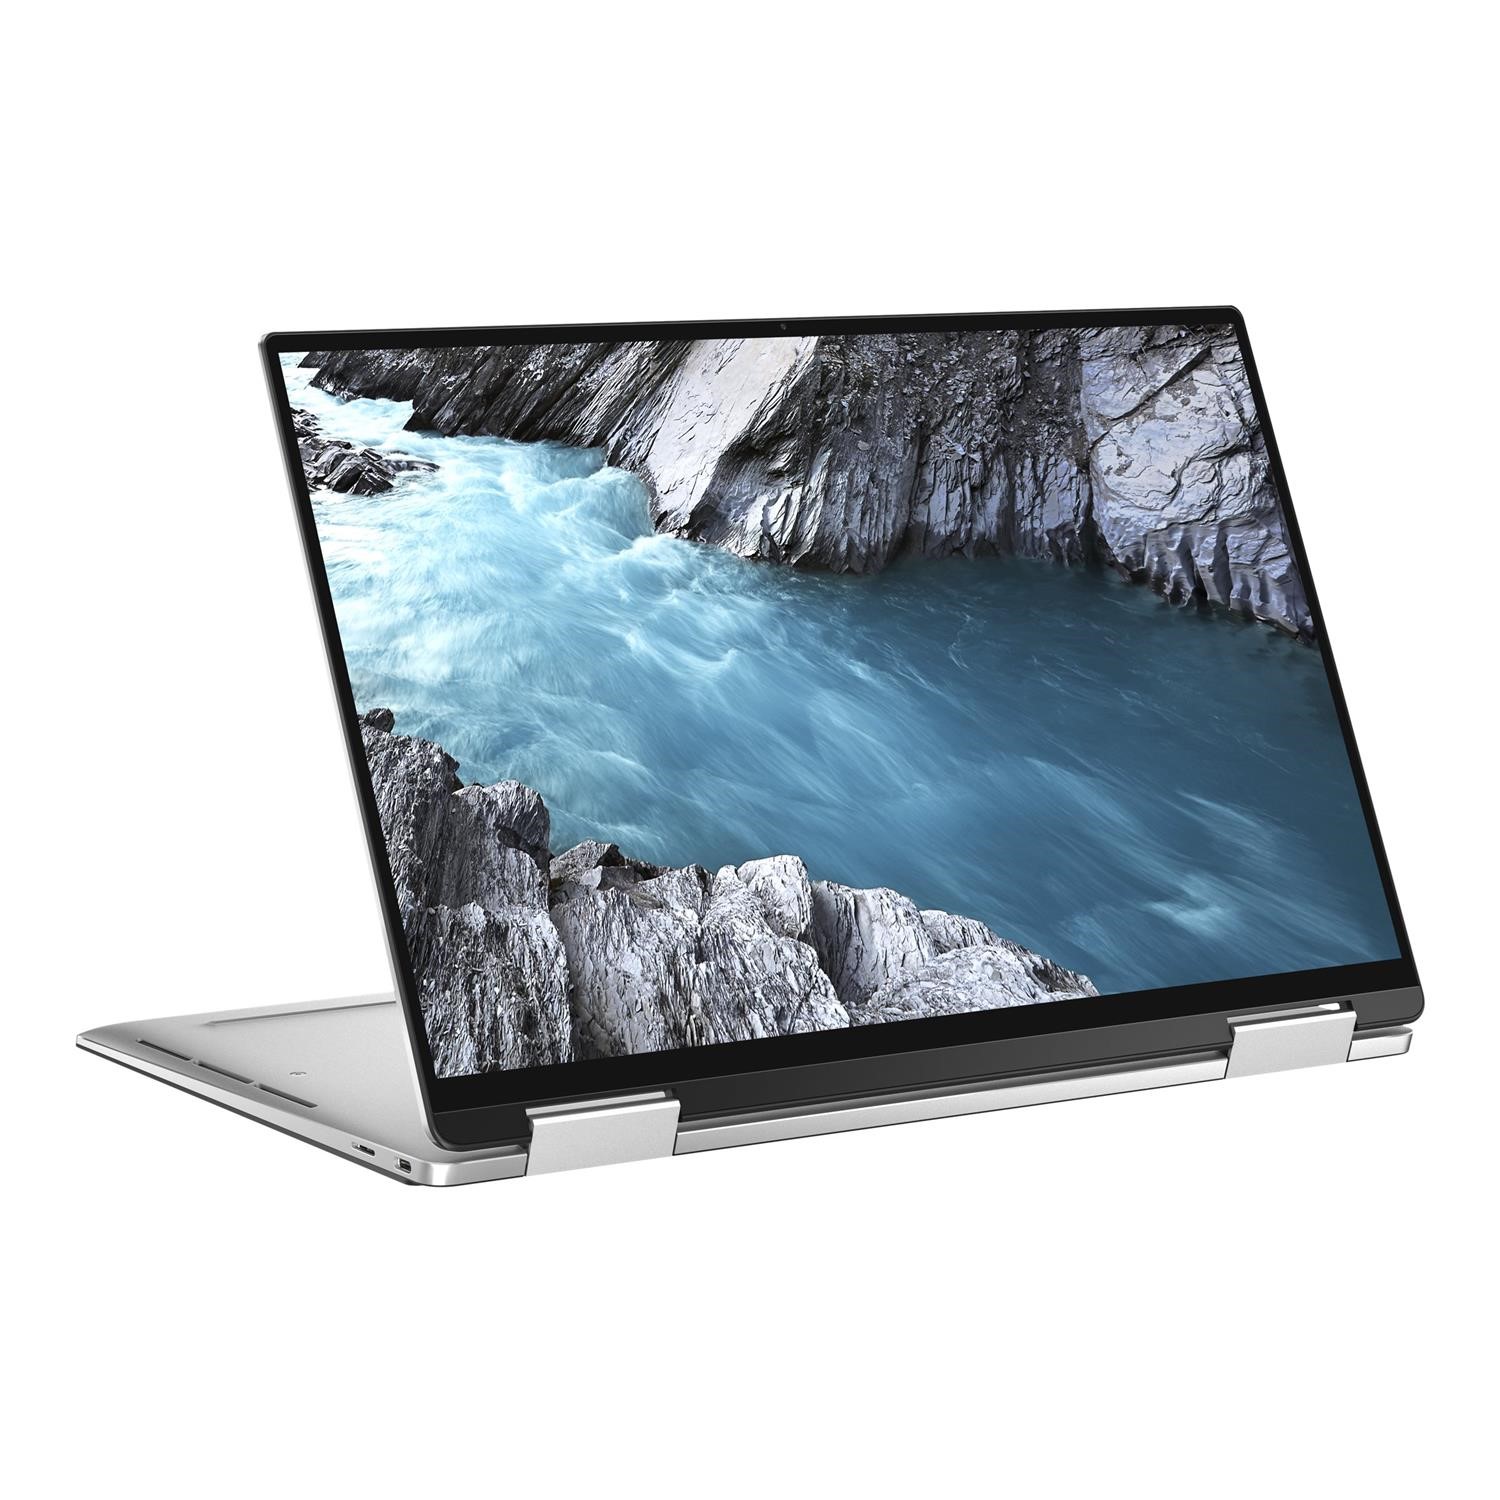 Dell XPS 13 9310 Core i5-1135G7 8GB 256GB SSD  Inch Touchscreen Windows  10 Pro 2 in 1 Laptop - Laptops Direct